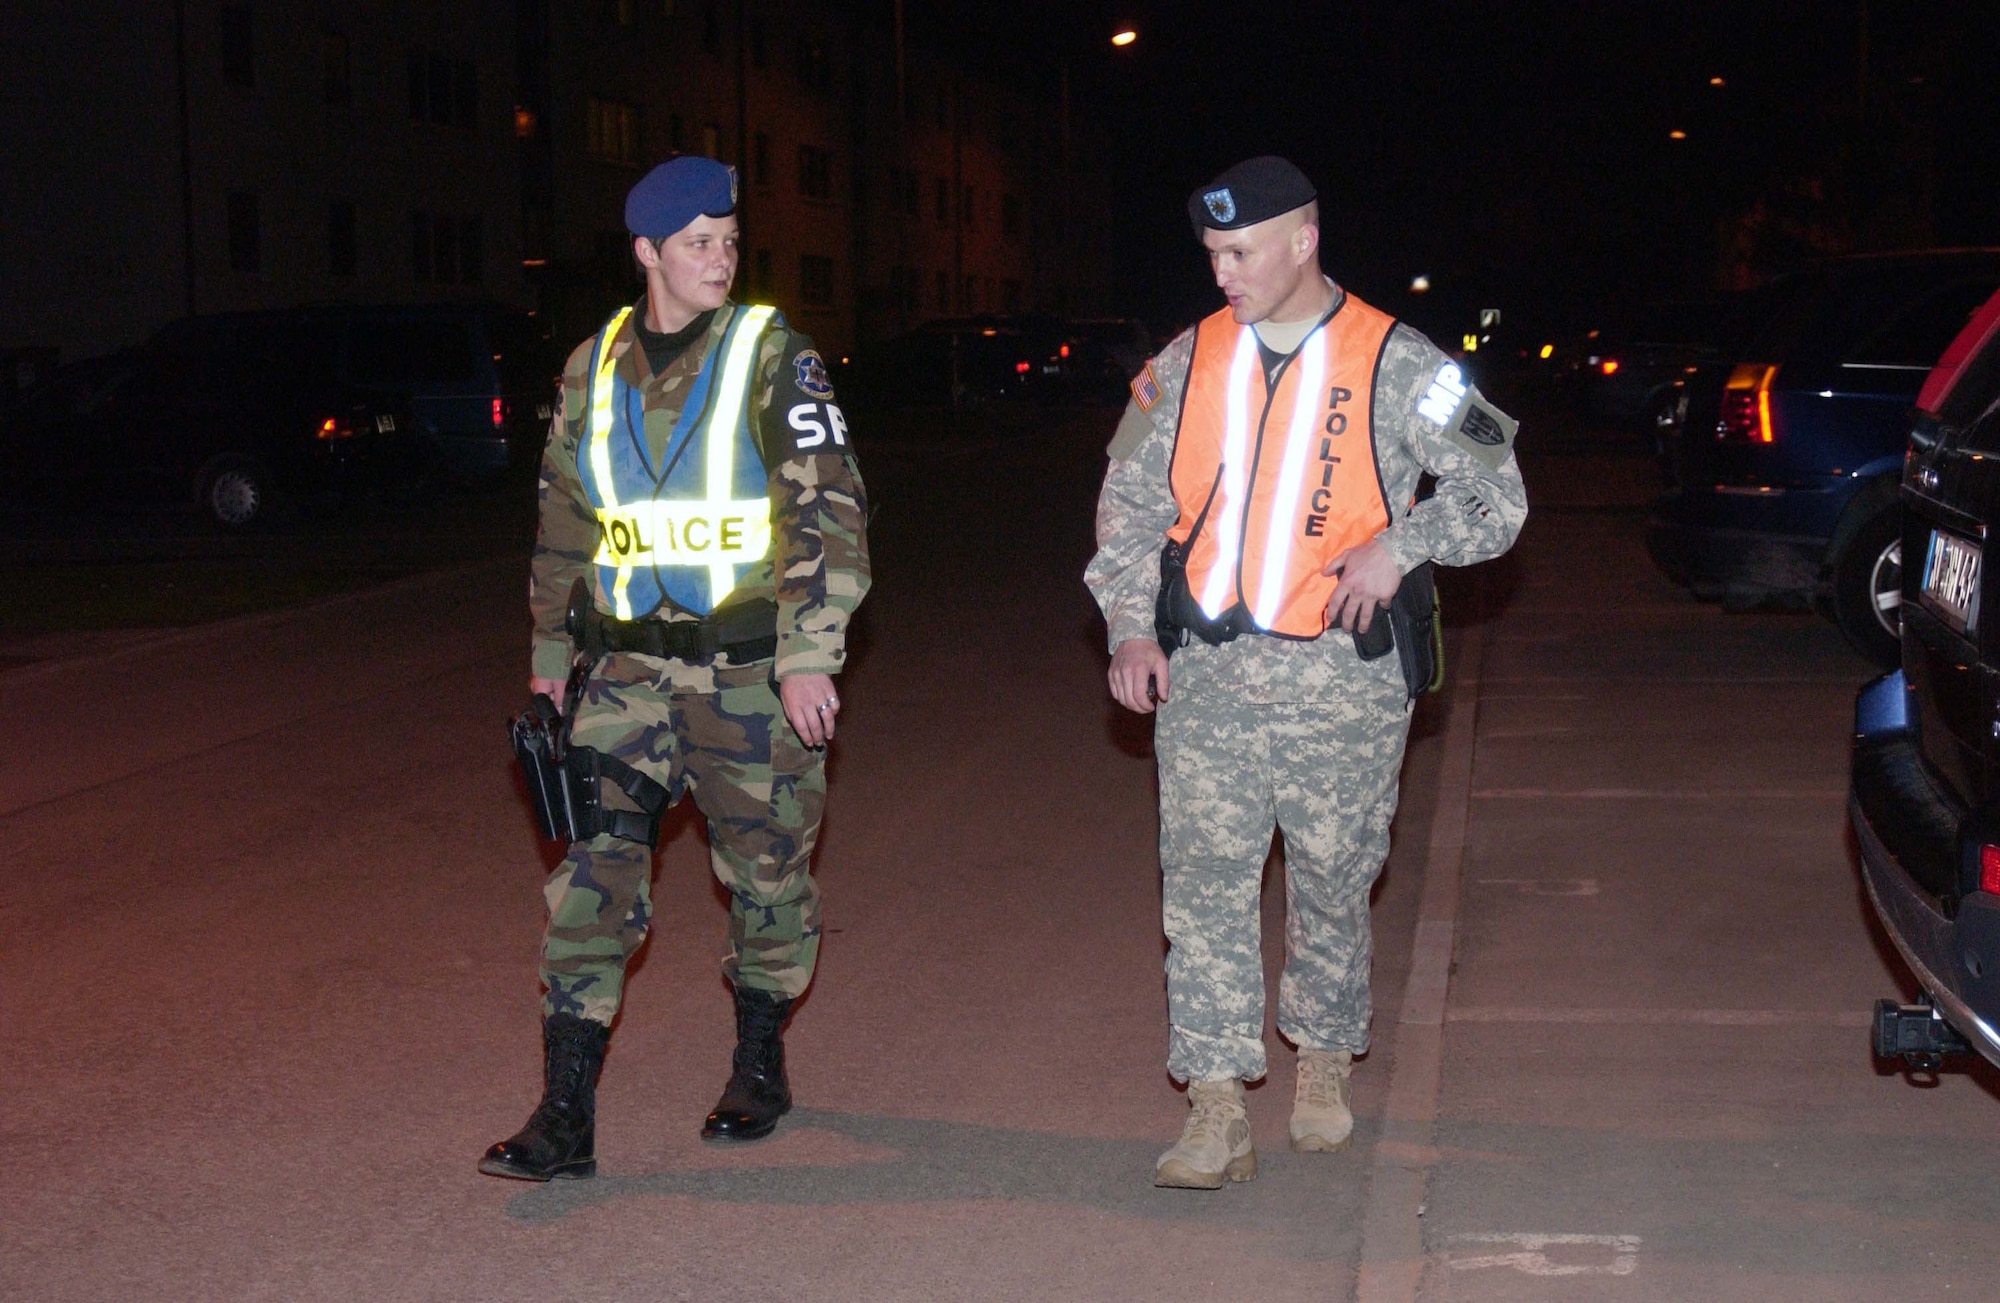 German Zivilian Police-4 Sandra Kerch, from the 569th U.S. Forces Police Squadron, and Spc. William Taylor, from the 230th Military Police Company, patrol the streets on Halloween last year in the housing area on Landstuhl Regional Medical Center. Photo by Christine June, USAG Kaiserslautern. 

                 